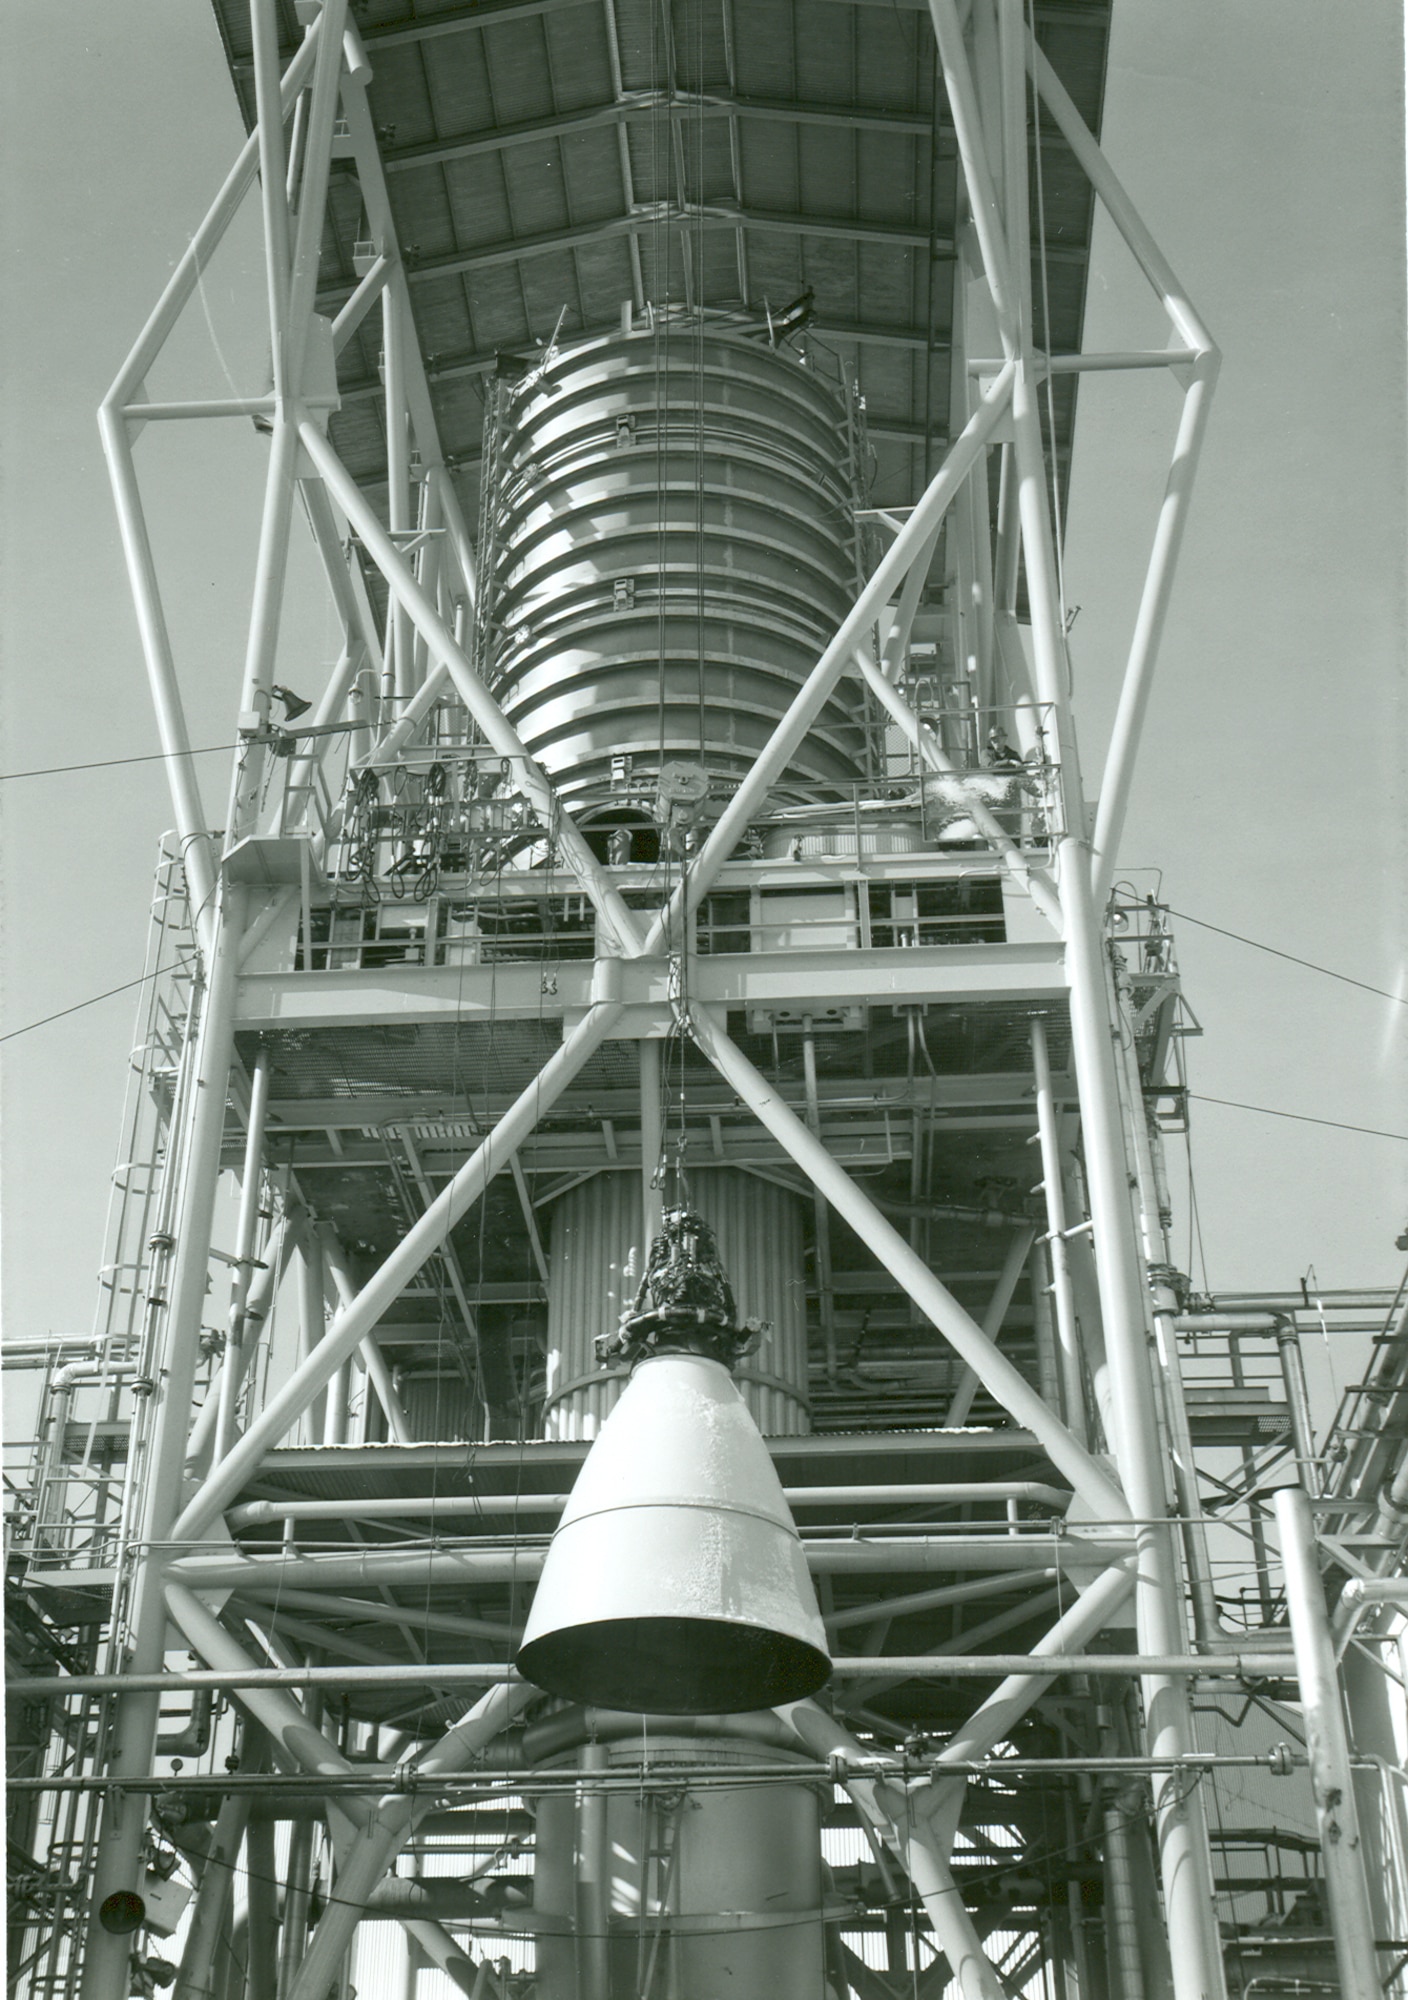 The rocket motor for the Apollo Service Module is installed for testing in J-3 at Arnold Air Force Base in 1966. The motor was repeatedly test fired in near space conditions to help NASA qualify the system as man-rated for the flight to the moon. This year marks the 60th anniversary of completion of the construction on J-3 and the initiation of the first operational test in the cell. (U.S. Air Force photo)